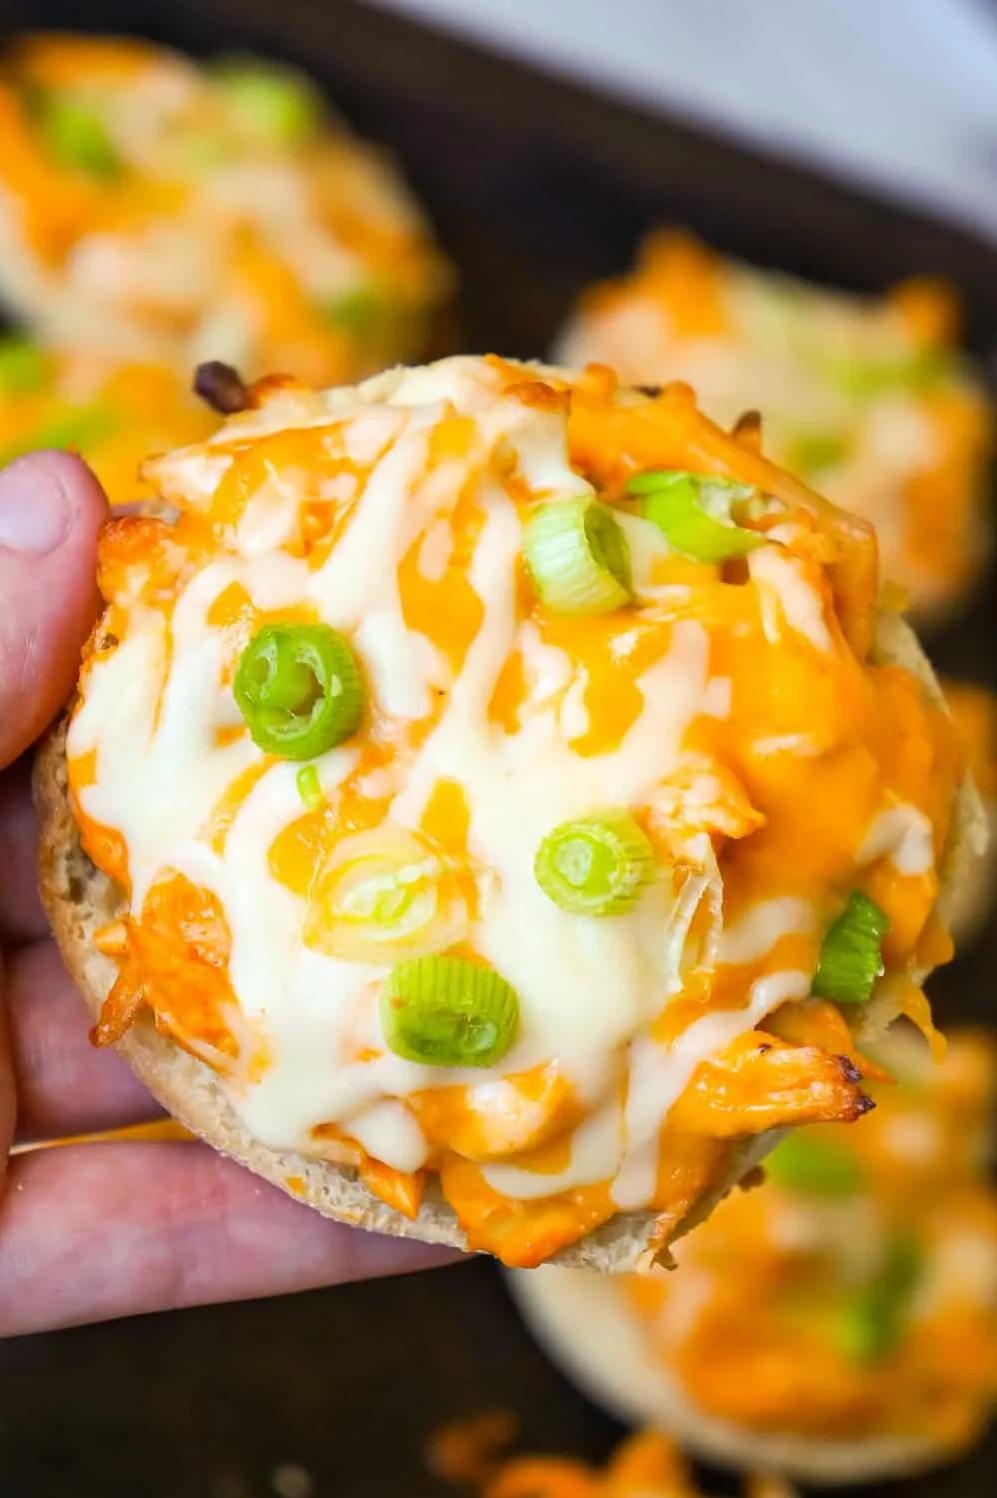  Sink your teeth into these savory chicken cheese English muffins!